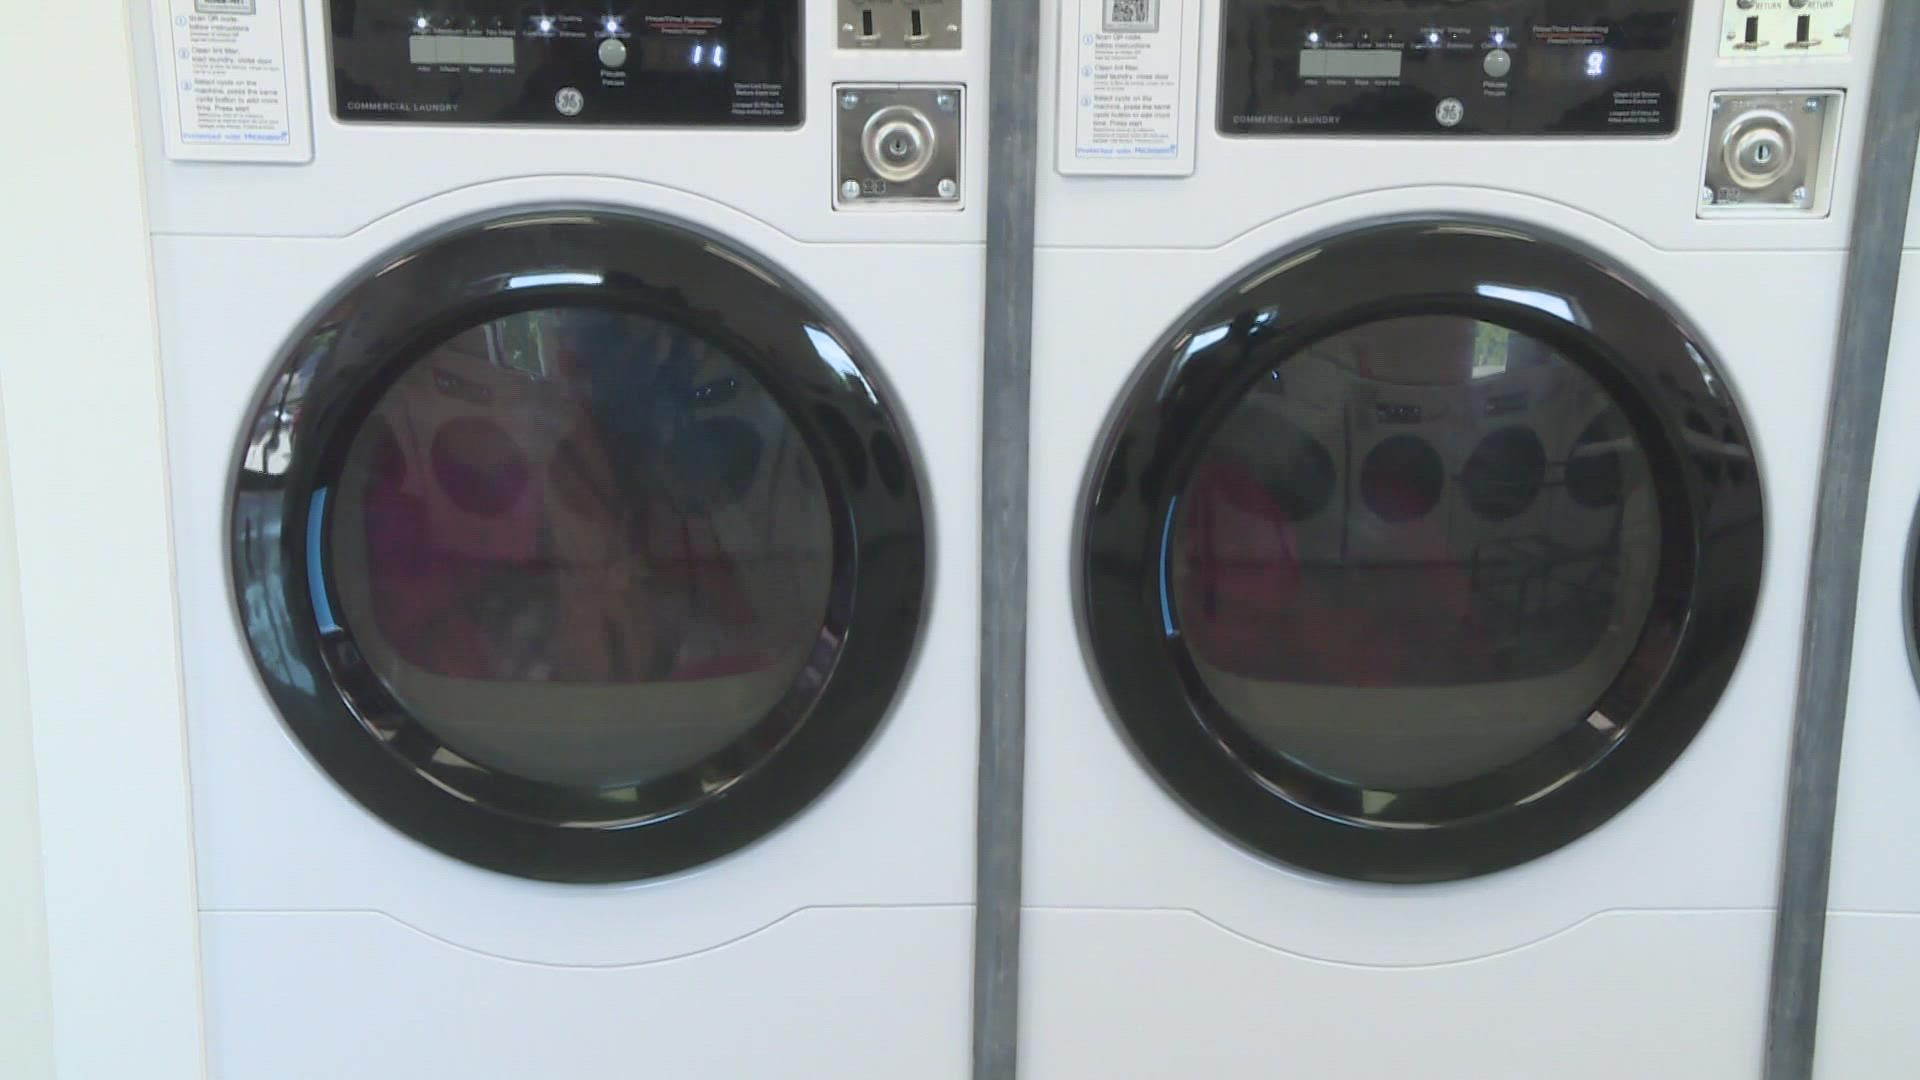 Youth Builds transformed a vacant lot into a laundromat and housing program for kids.